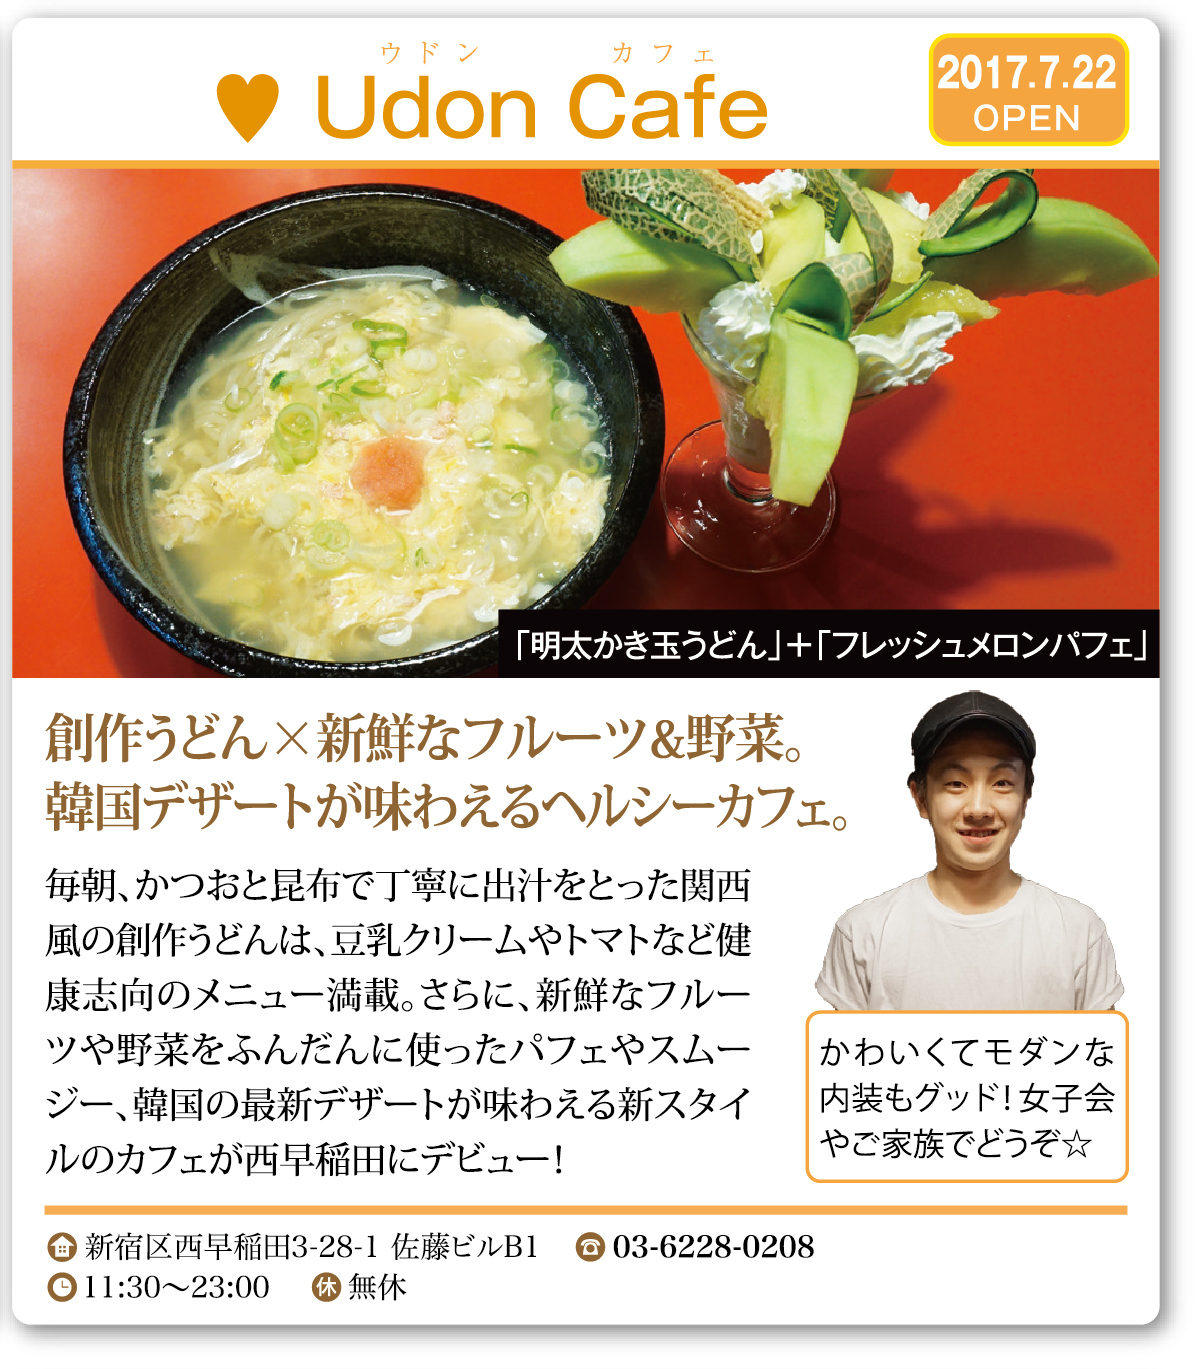 ♥ Udon Cafe（ウドン カフェ）